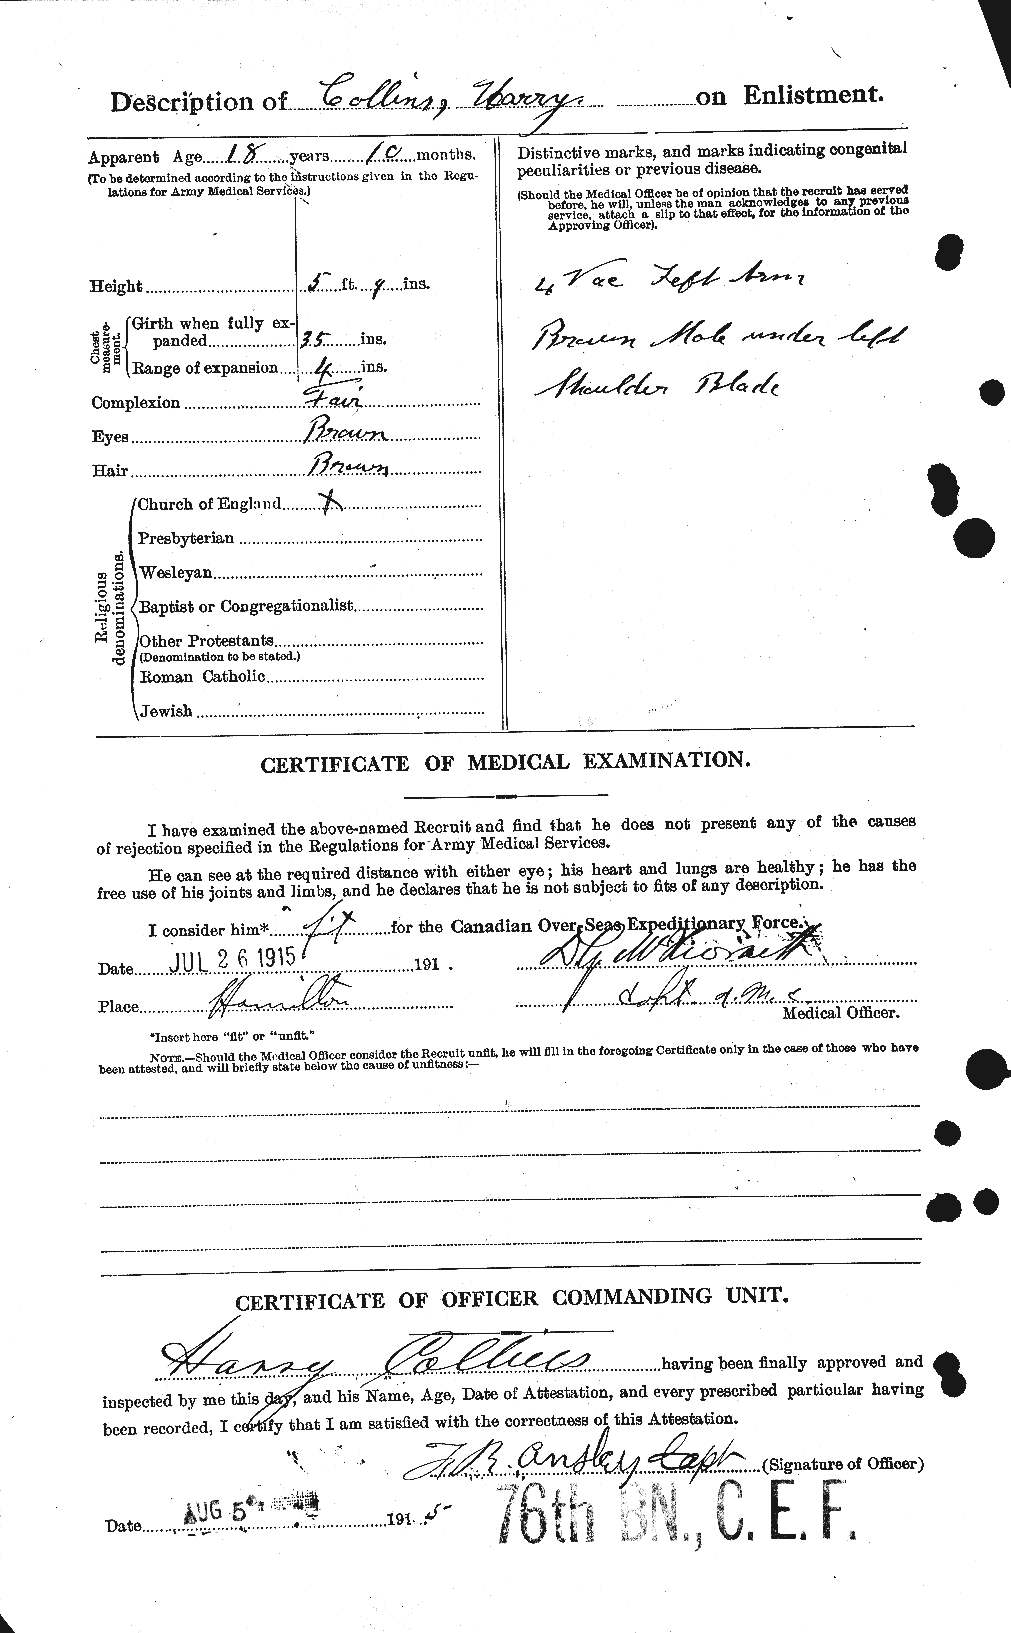 Personnel Records of the First World War - CEF 070025b